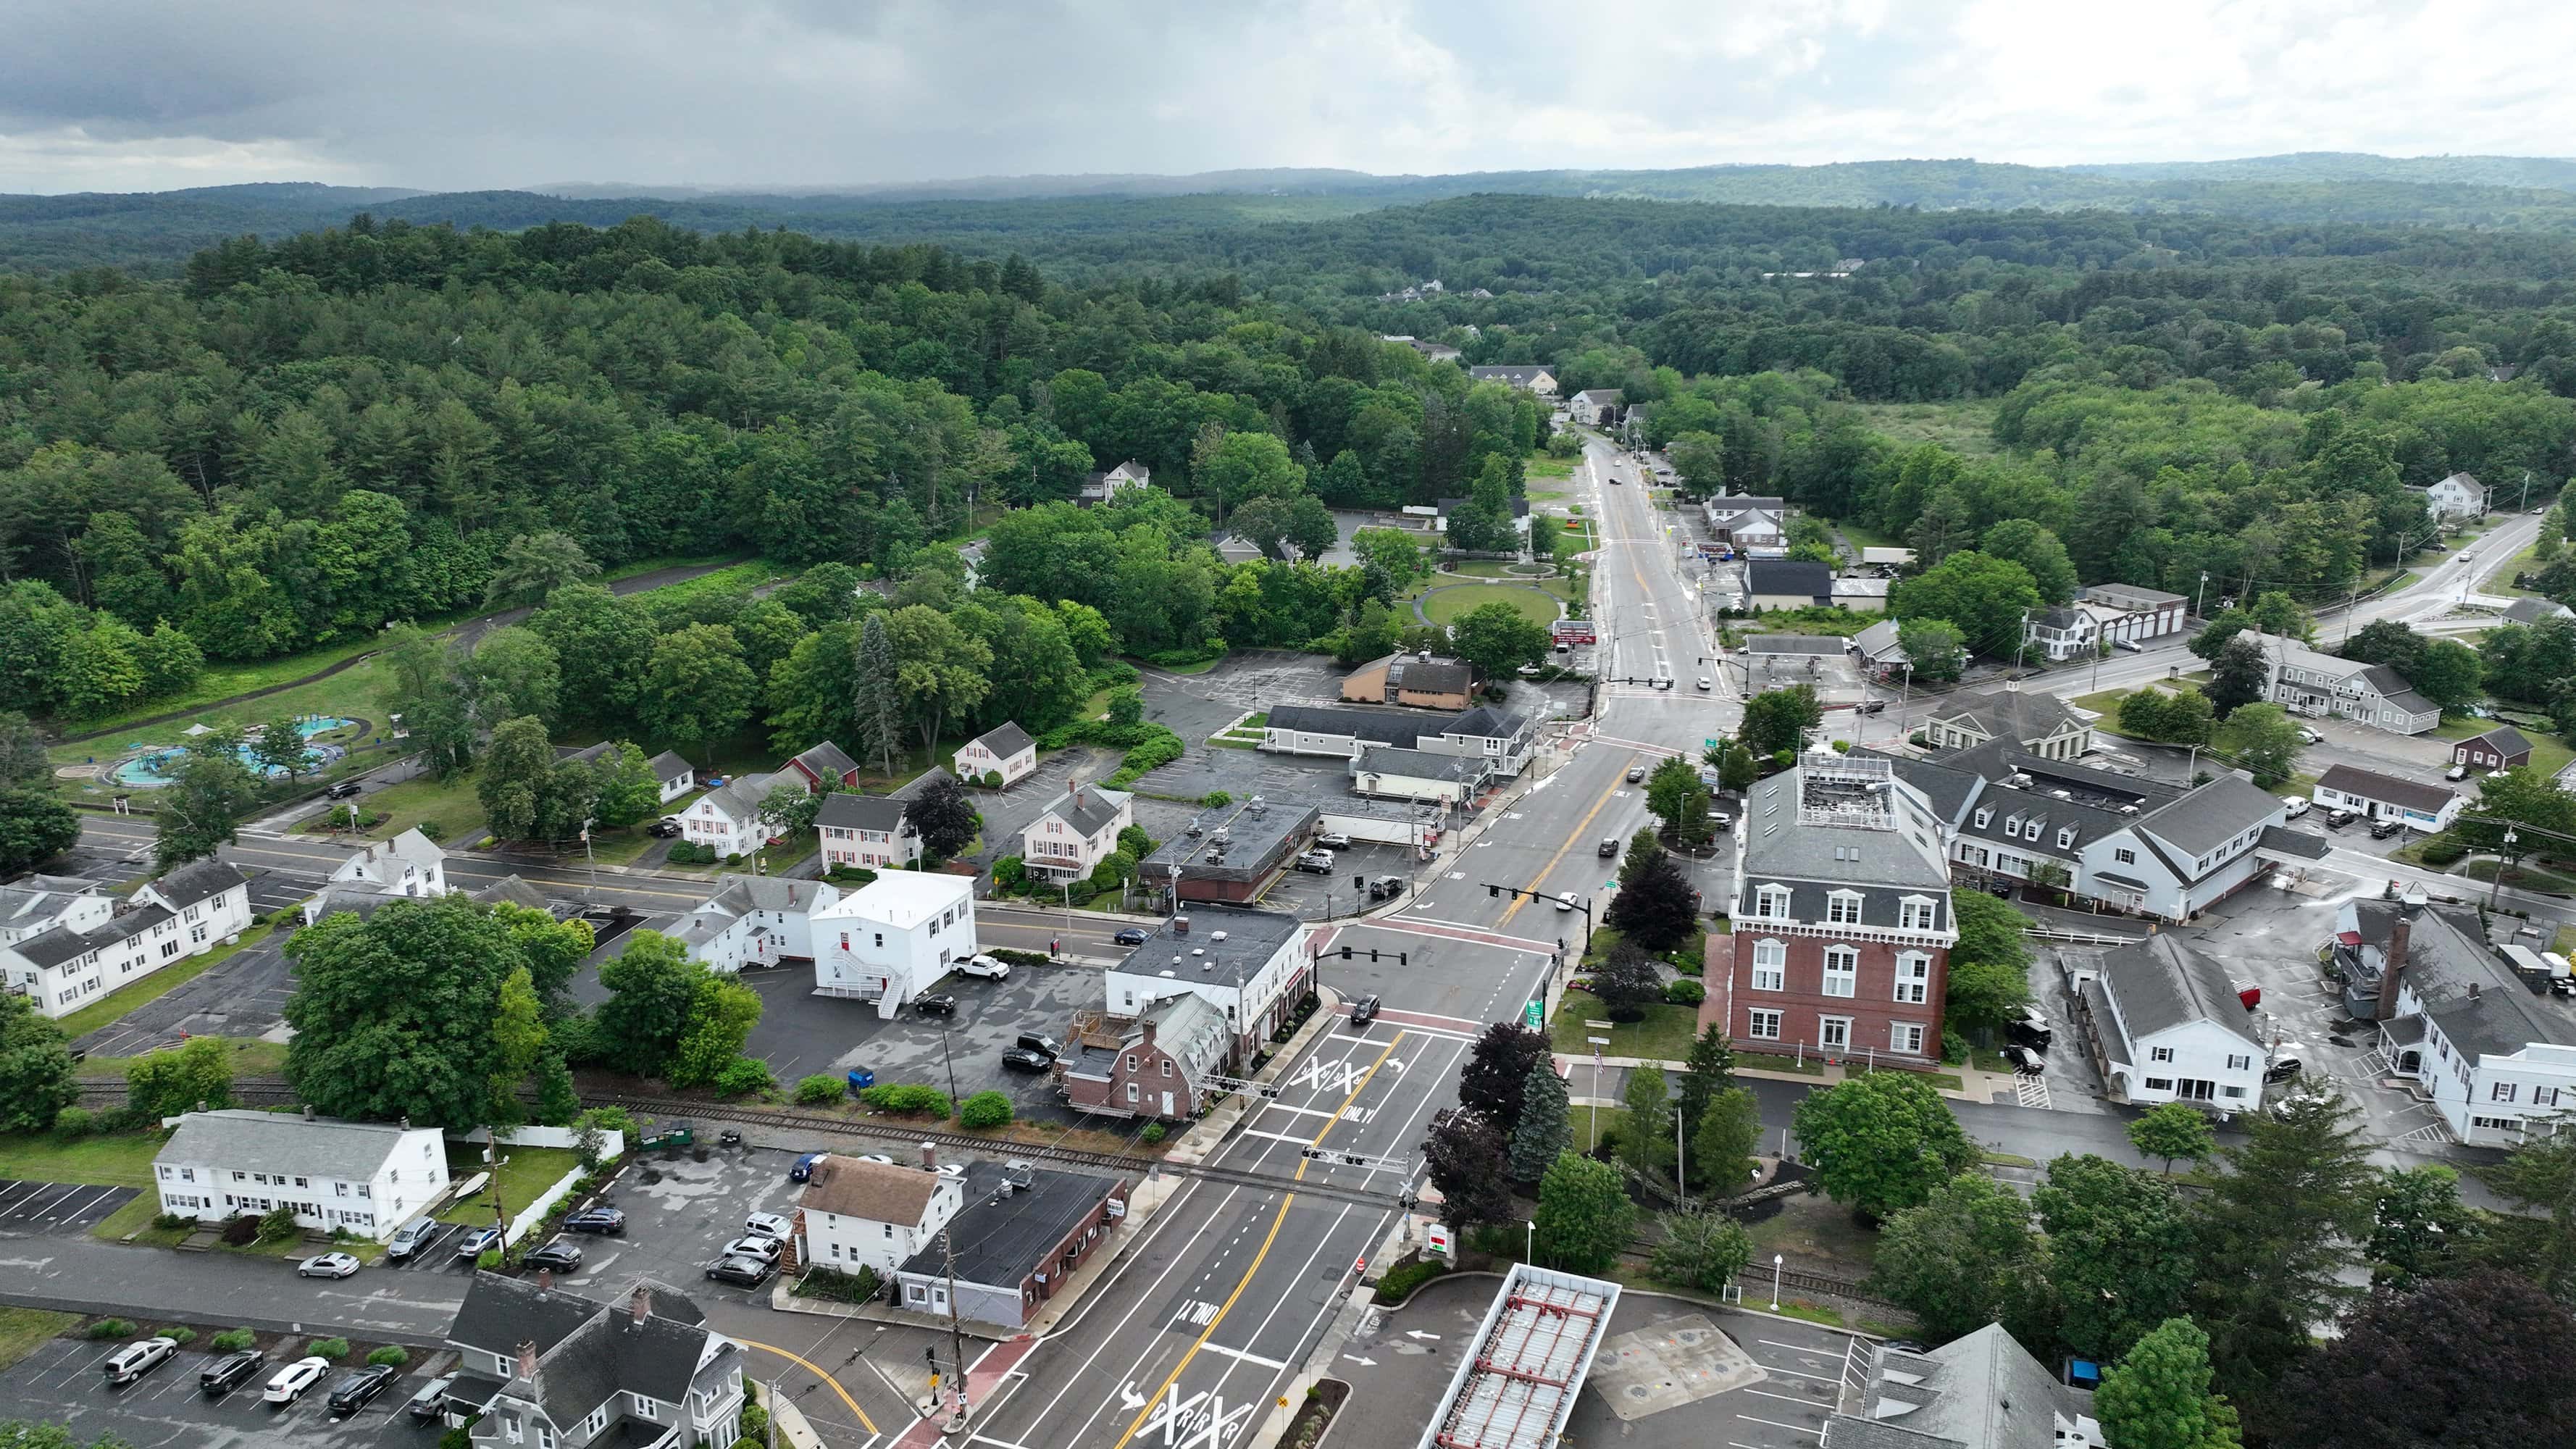 $250K in ARPA funds allotted for downtown Northborough improvements